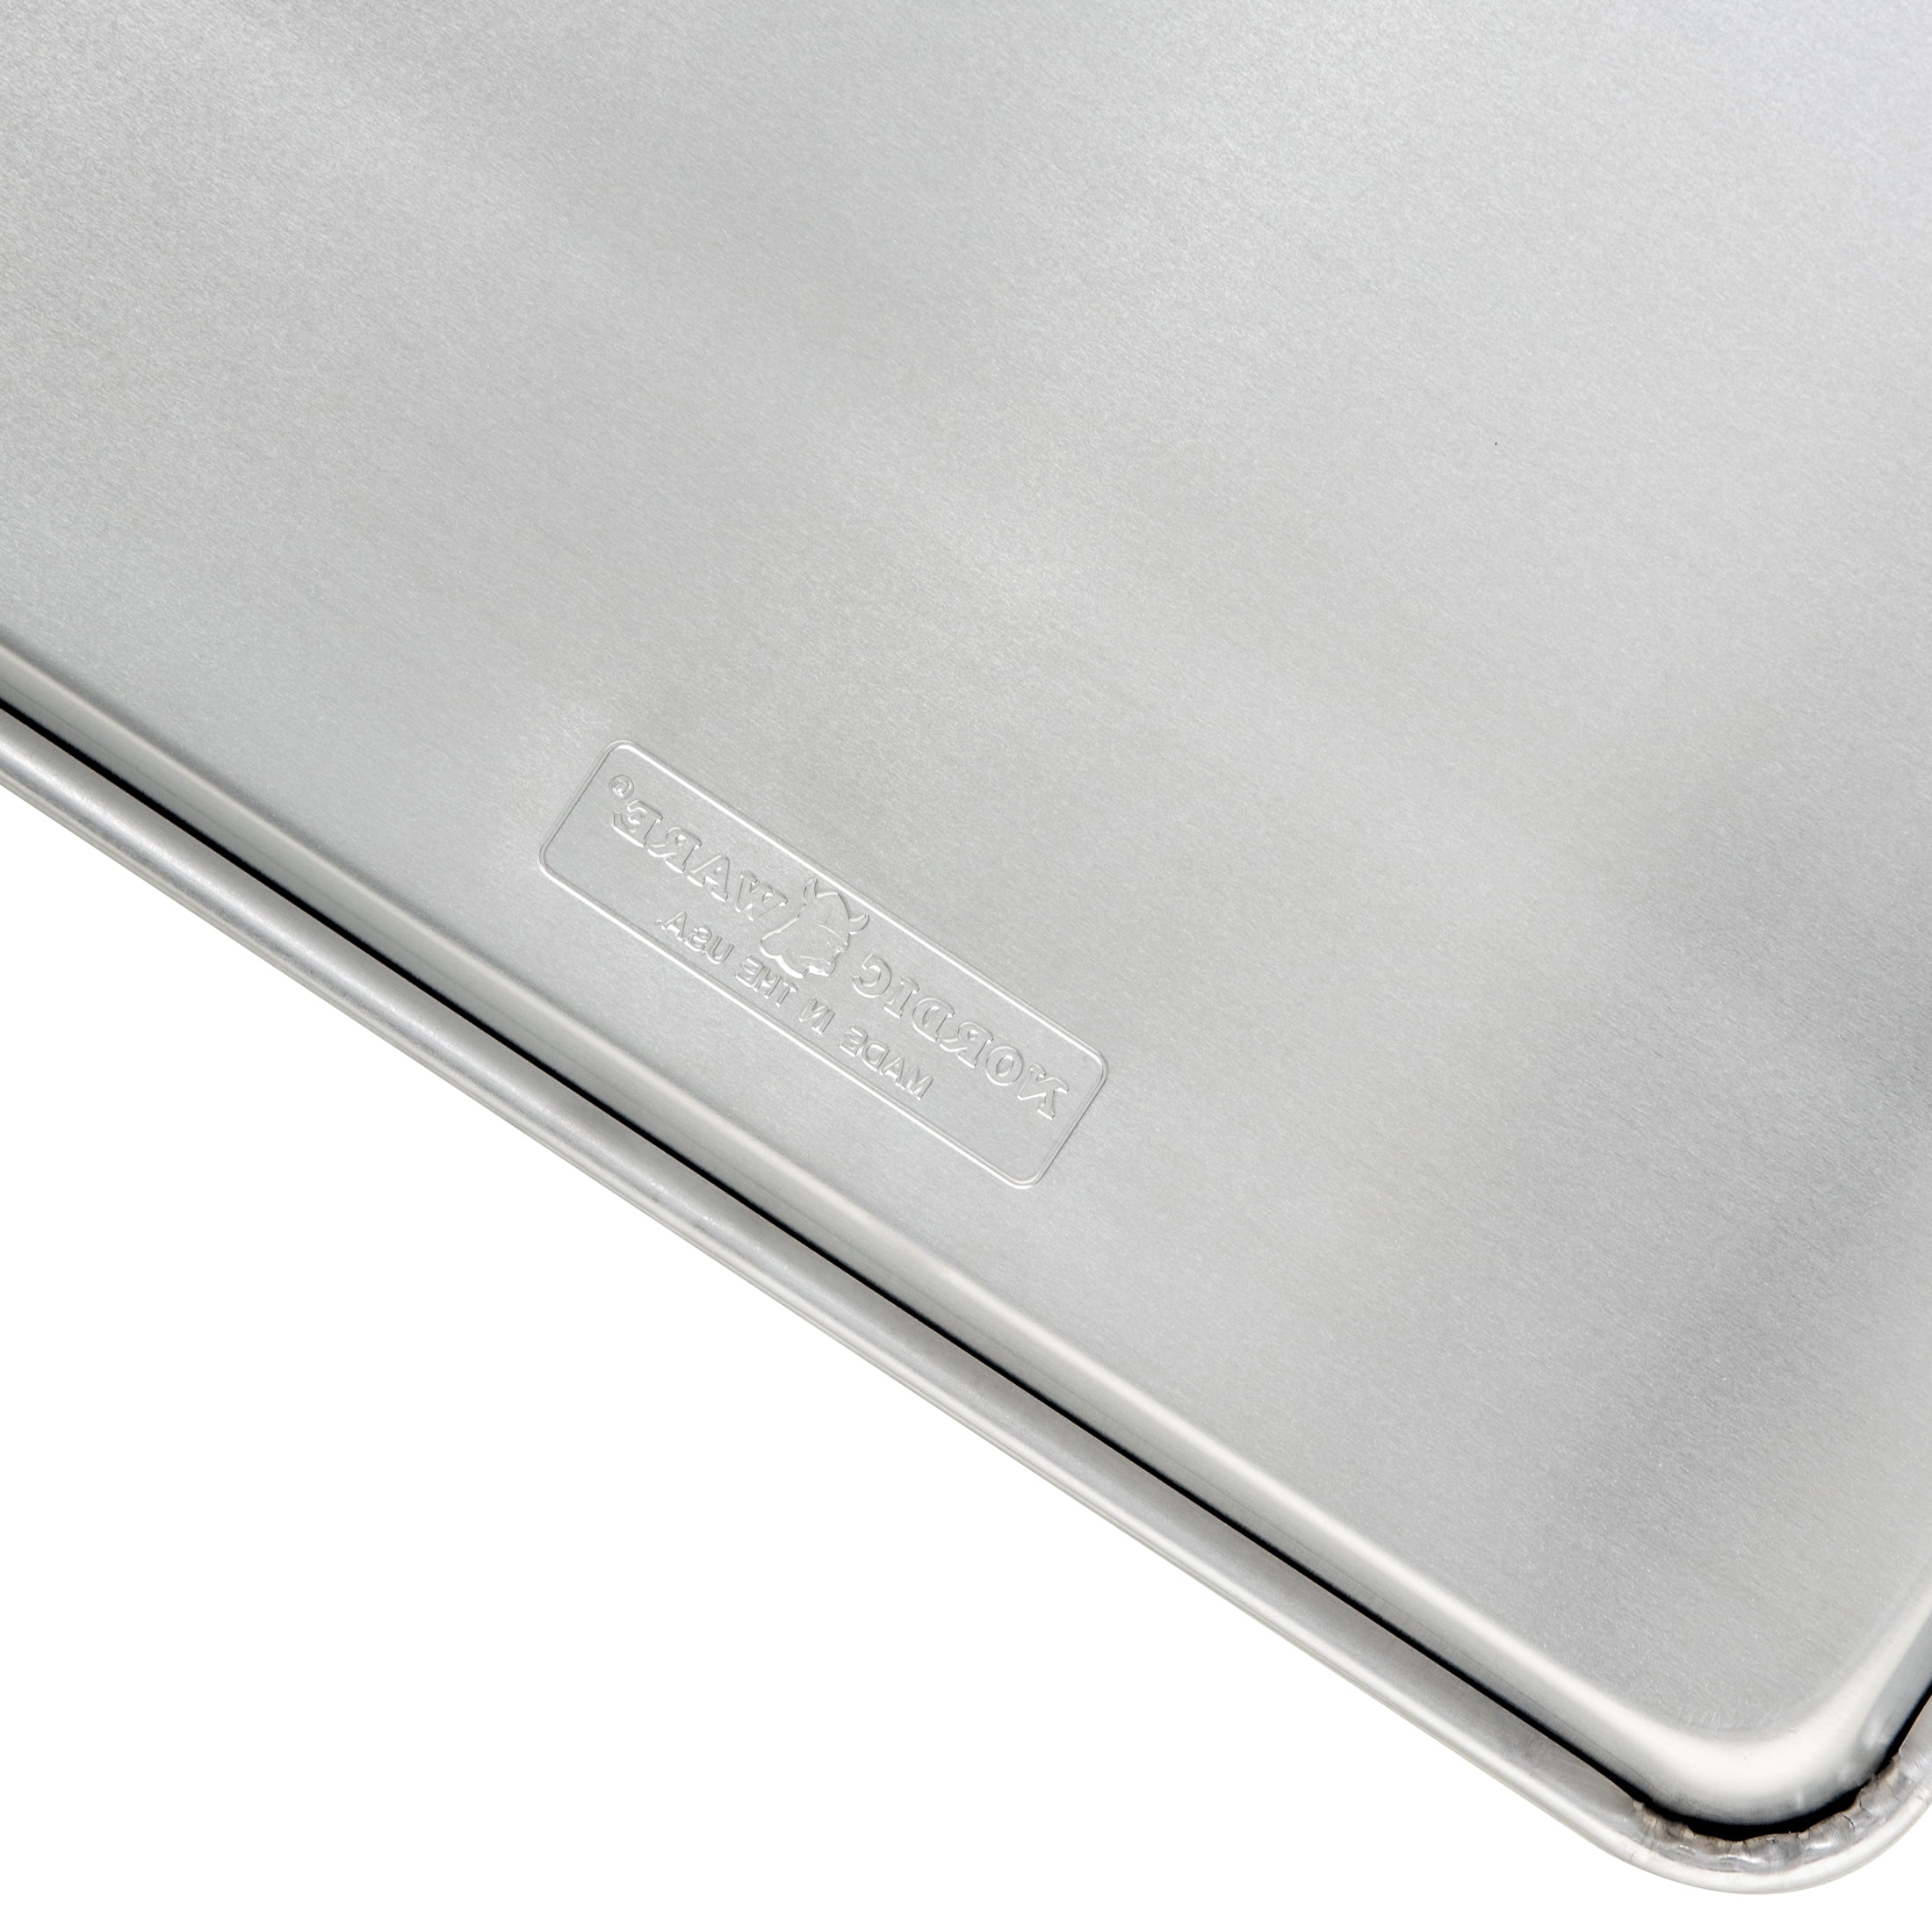 Nordic Ware Aluminum Extra Large Cookie Sheet 